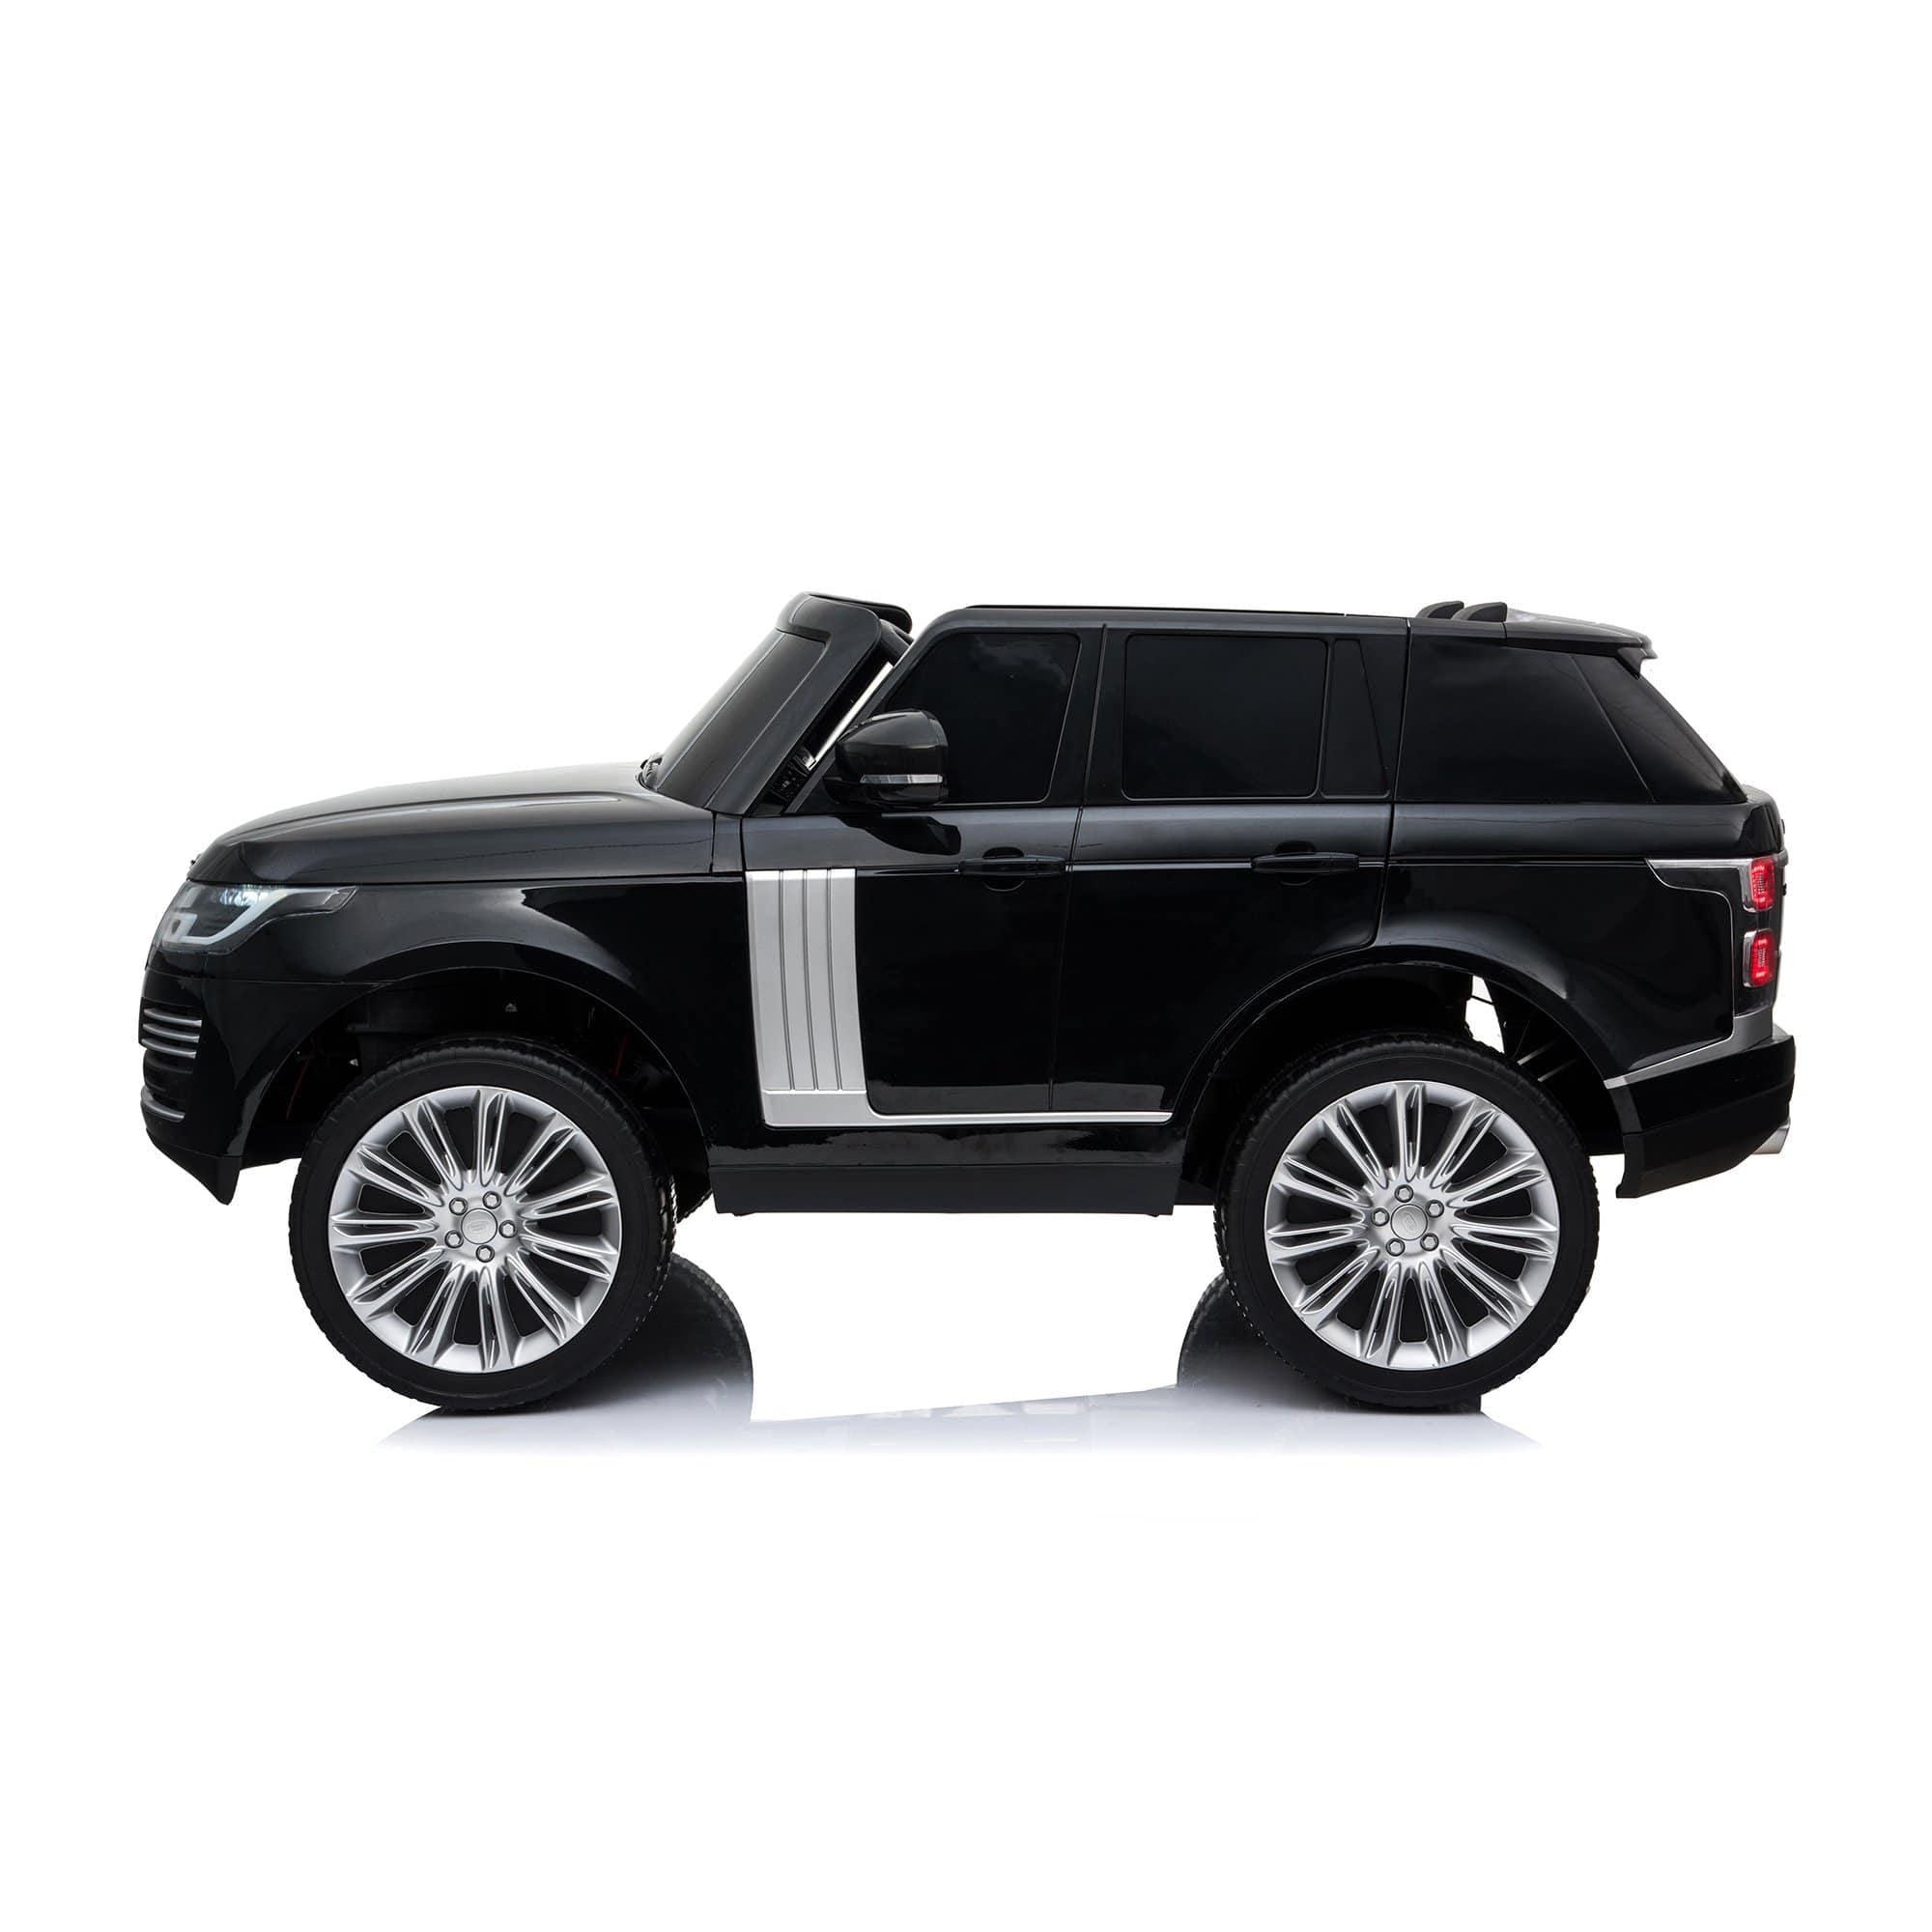 24V Range Rover HSE 2 Seater Ride on - DTI Direct USA